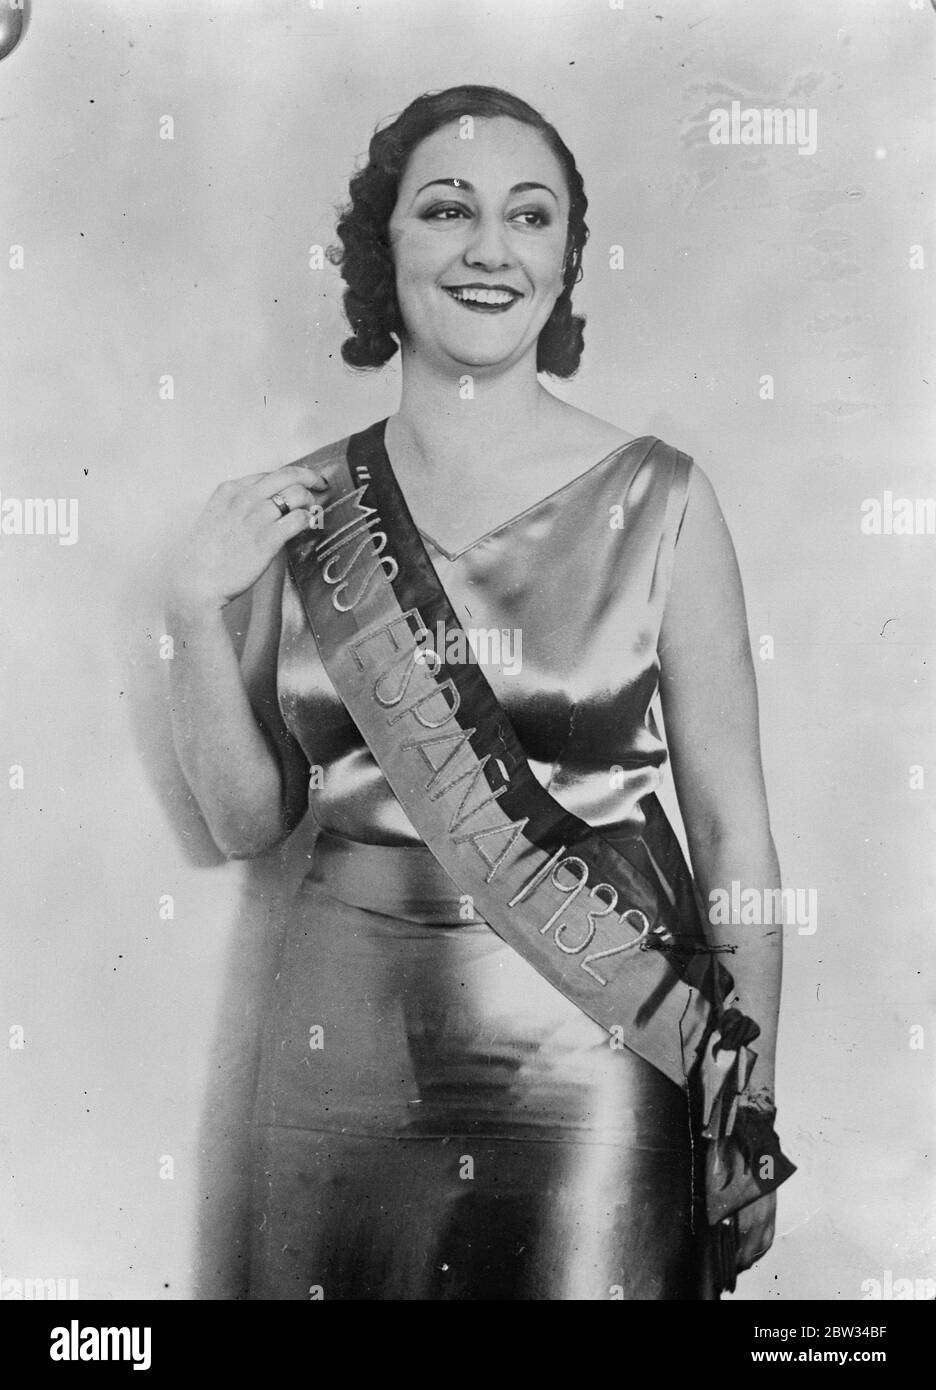 Spain 's queen of beauty . The various European countries are busy selecting their most most beautiful women to send Paris to compete in the international beauty competition to select a Miss Europe , next month . Photo shows Senorita Teresa Daniel from Catalonia who was selected as Miss Spain for 1932 . 23 January 1932 Stock Photo